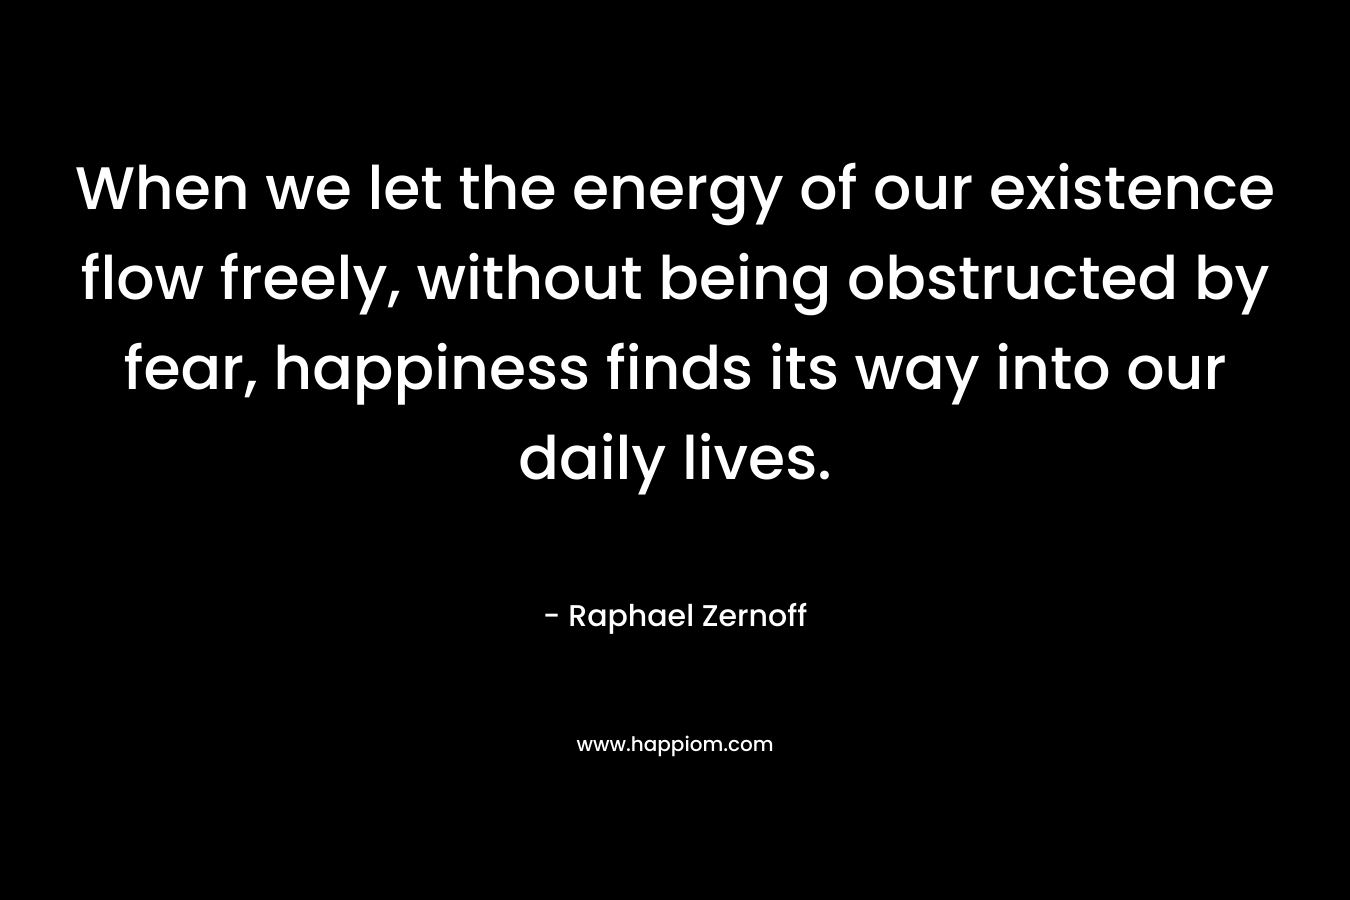 When we let the energy of our existence flow freely, without being obstructed by fear, happiness finds its way into our daily lives. – Raphael Zernoff